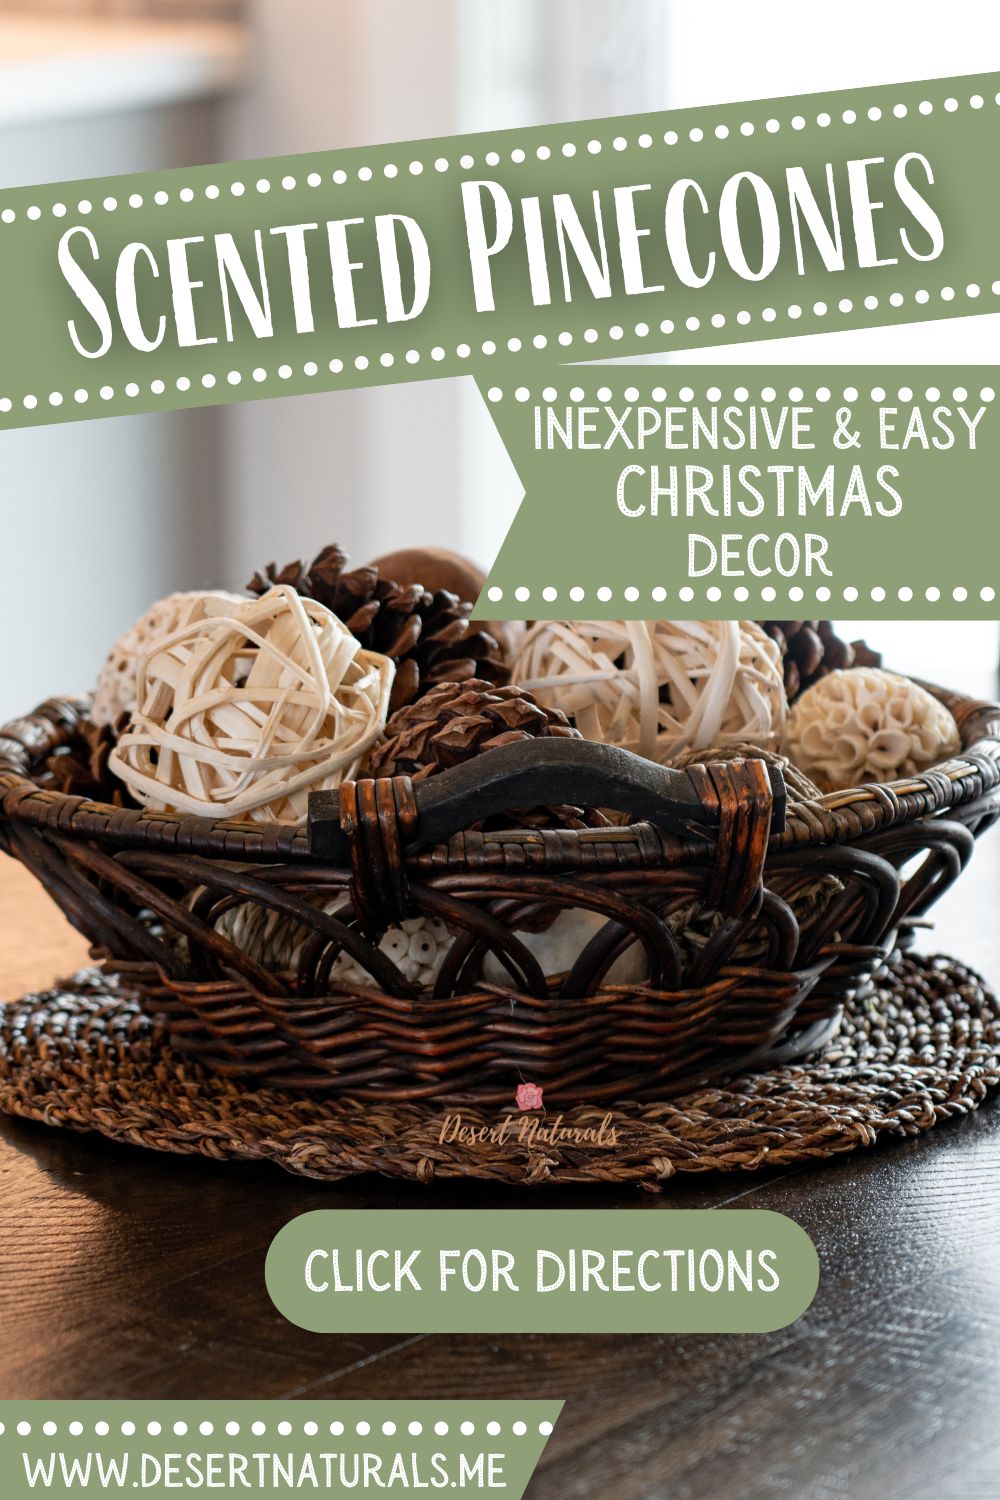 how to make diy scented pinecones for Christmas with essential oils